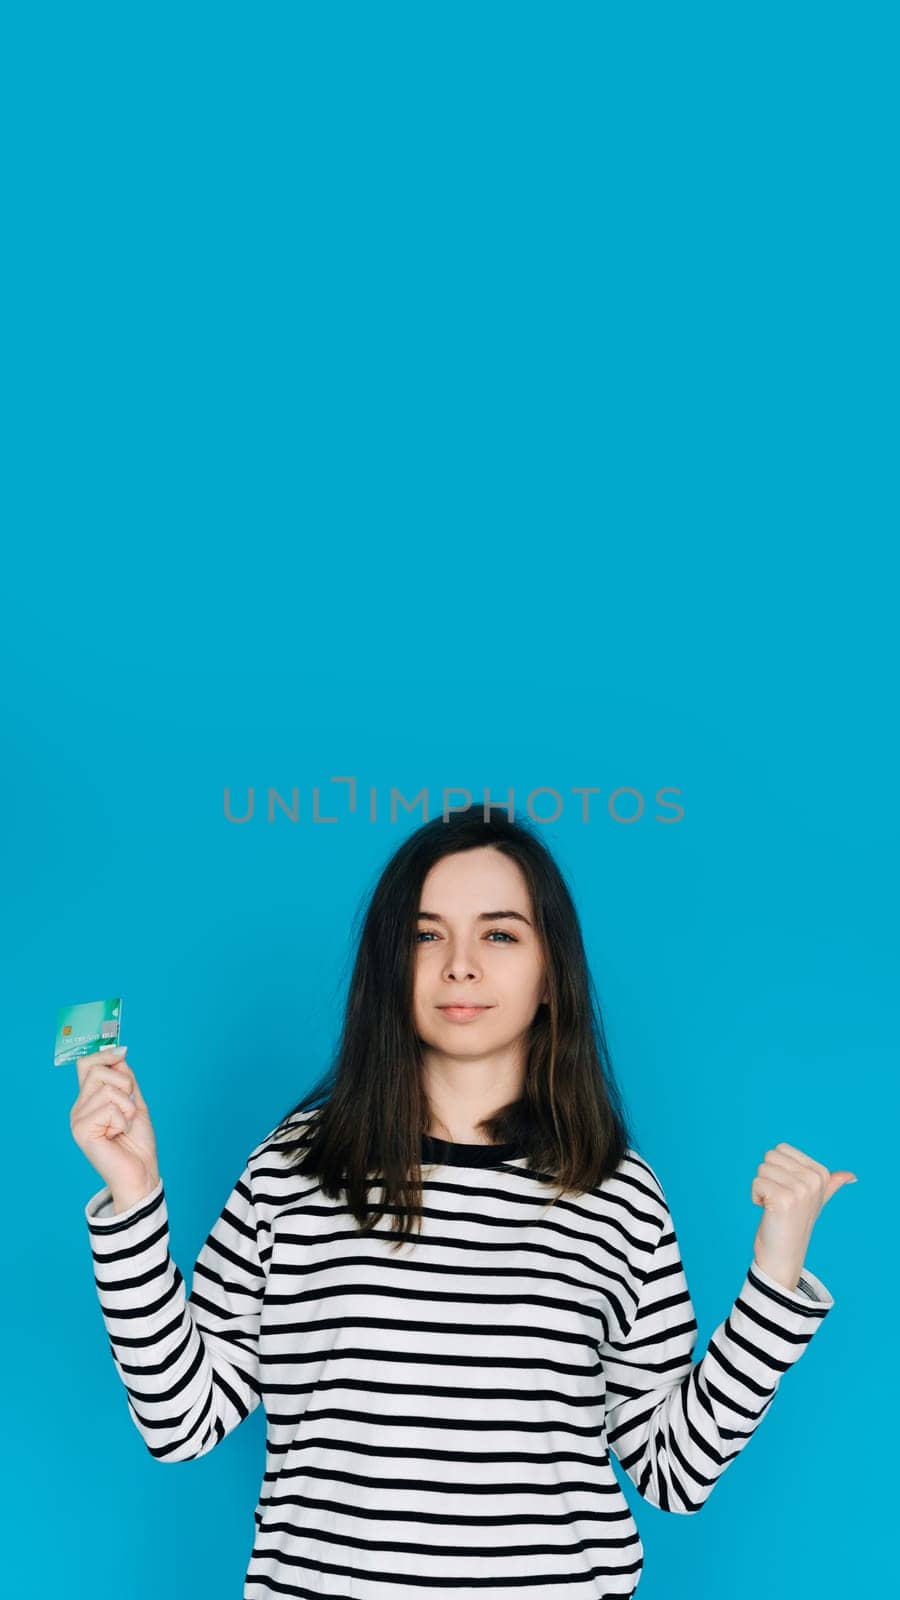 Woman Holding Credit Card, Pointing with Thumb in Empty Space - Female Expressing Confidence and Financial Freedom - Blue Background - Perfect for Banking, E-commerce, and Financial Services Concepts.